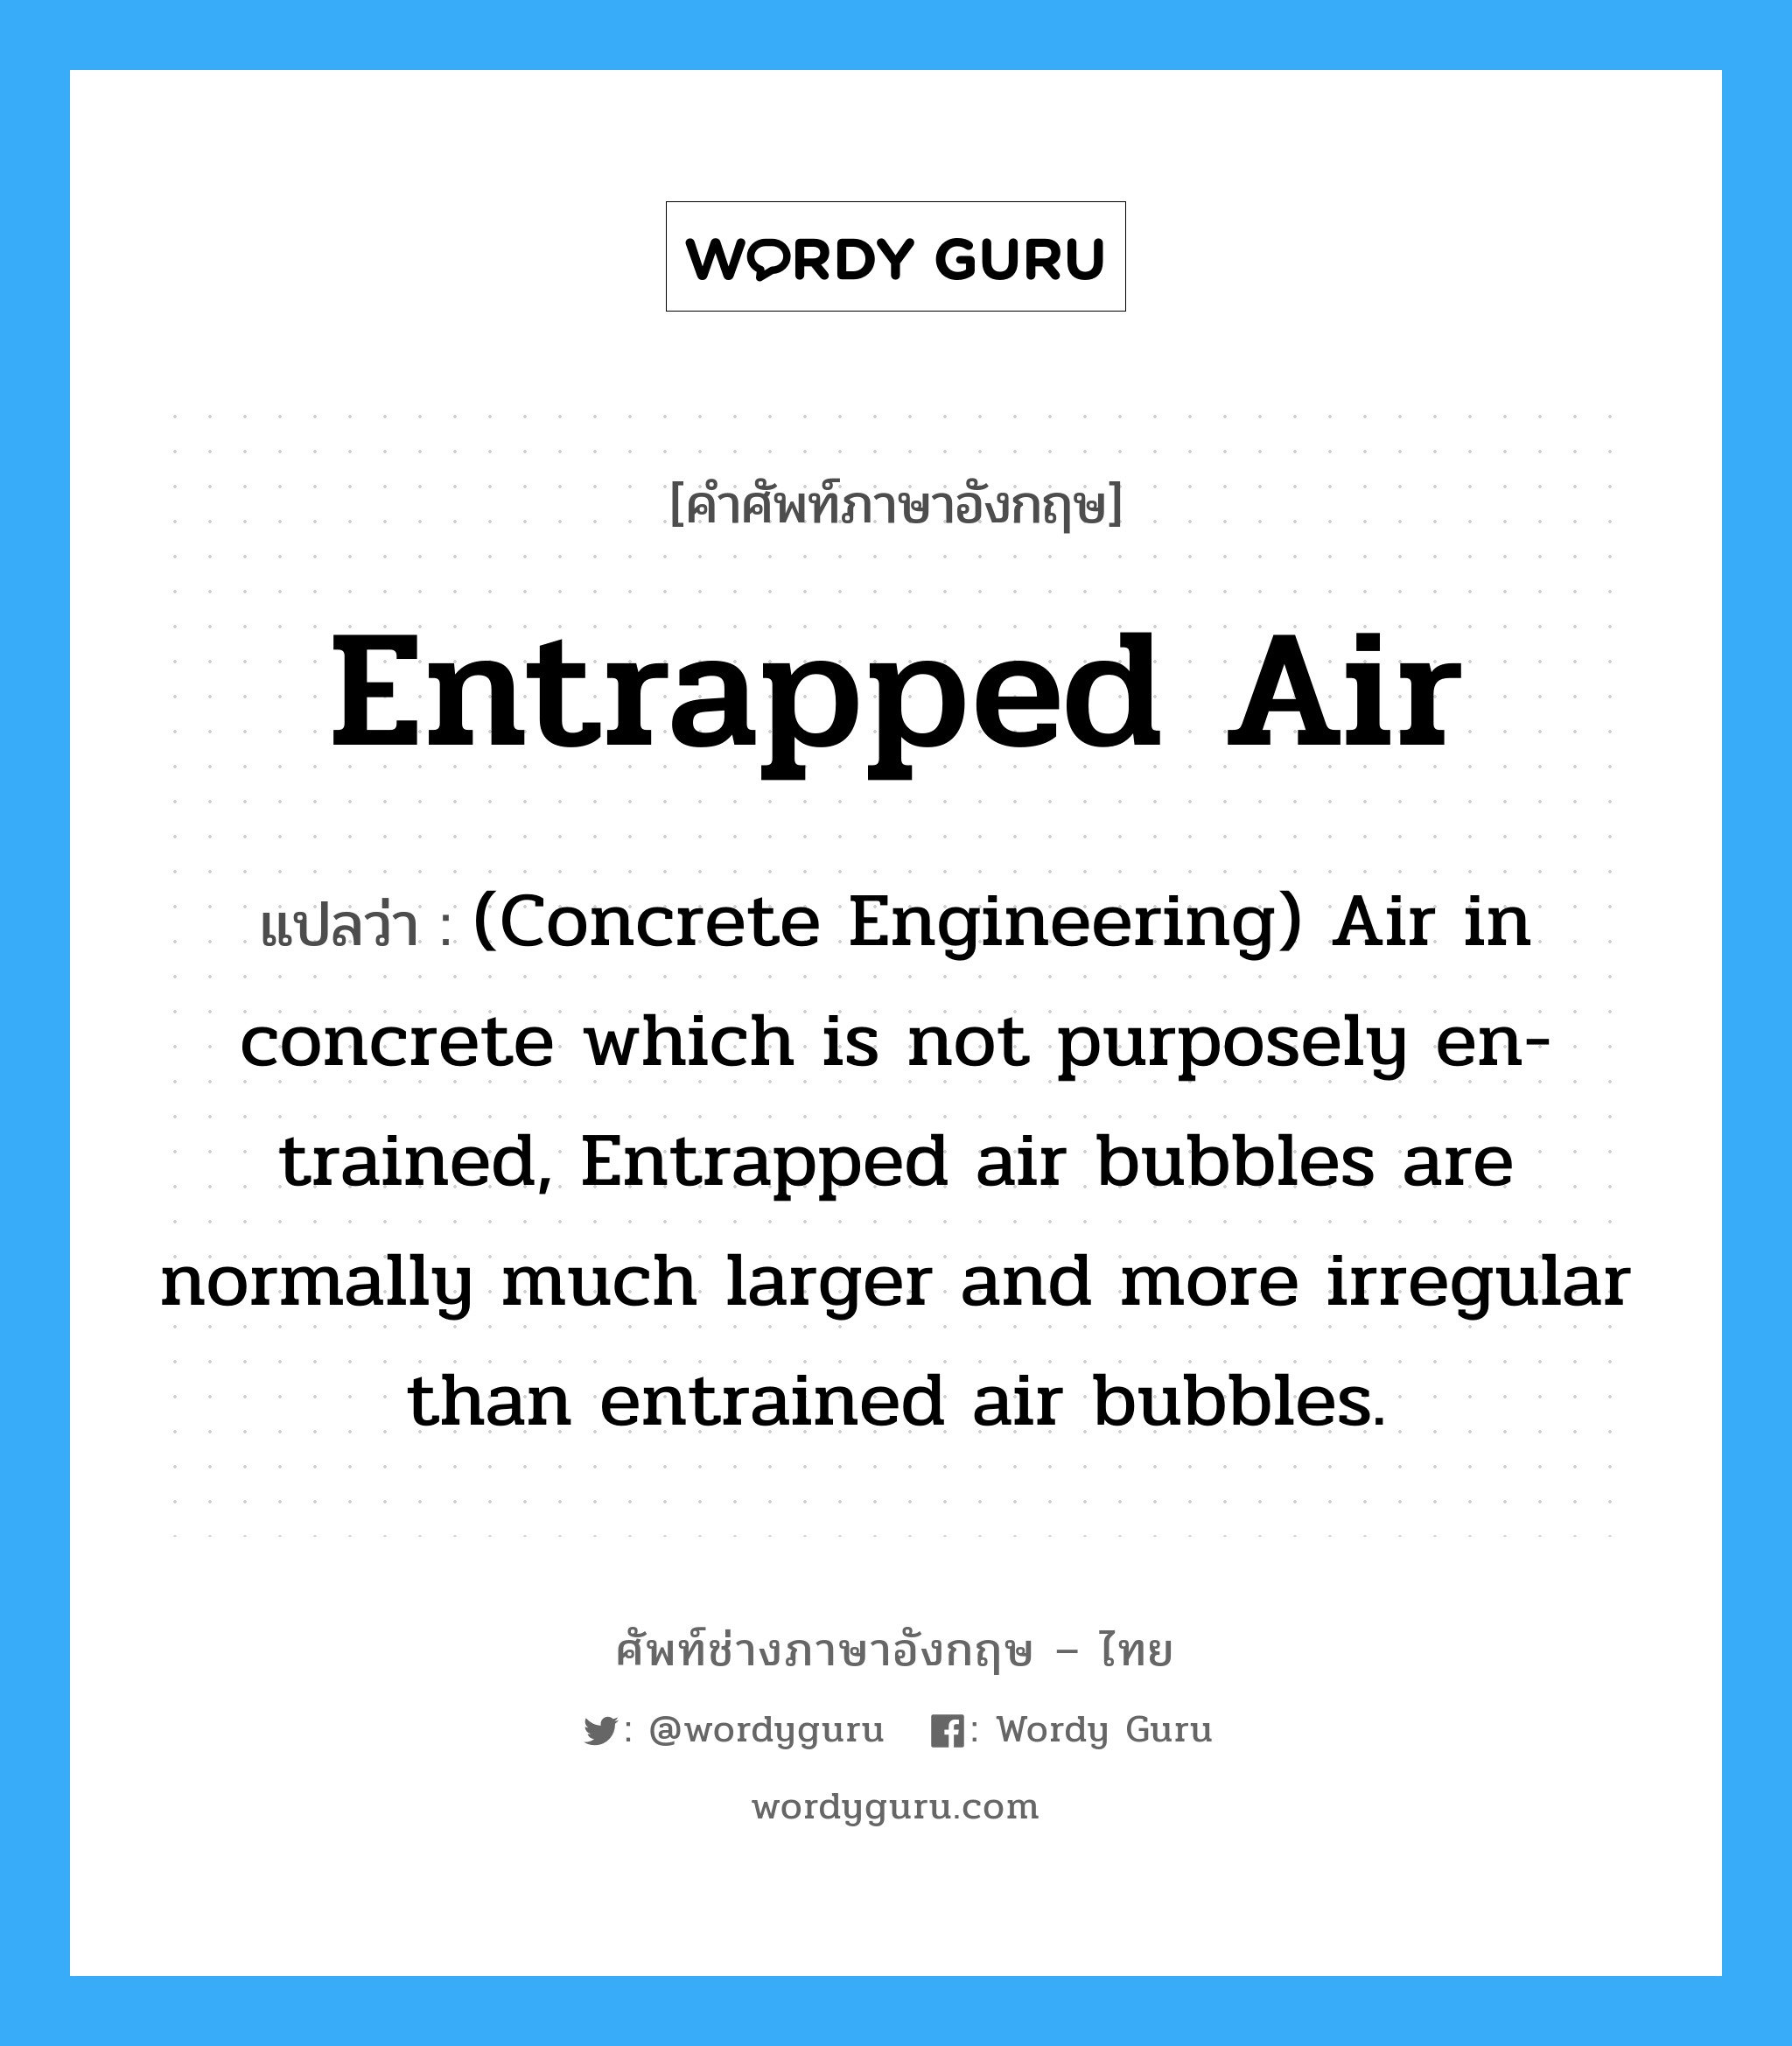 (Concrete Engineering) Air in concrete which is not purposely en-trained, Entrapped air bubbles are normally much larger and more irregular than entrained air bubbles. ภาษาอังกฤษ?, คำศัพท์ช่างภาษาอังกฤษ - ไทย (Concrete Engineering) Air in concrete which is not purposely en-trained, Entrapped air bubbles are normally much larger and more irregular than entrained air bubbles. คำศัพท์ภาษาอังกฤษ (Concrete Engineering) Air in concrete which is not purposely en-trained, Entrapped air bubbles are normally much larger and more irregular than entrained air bubbles. แปลว่า Entrapped Air